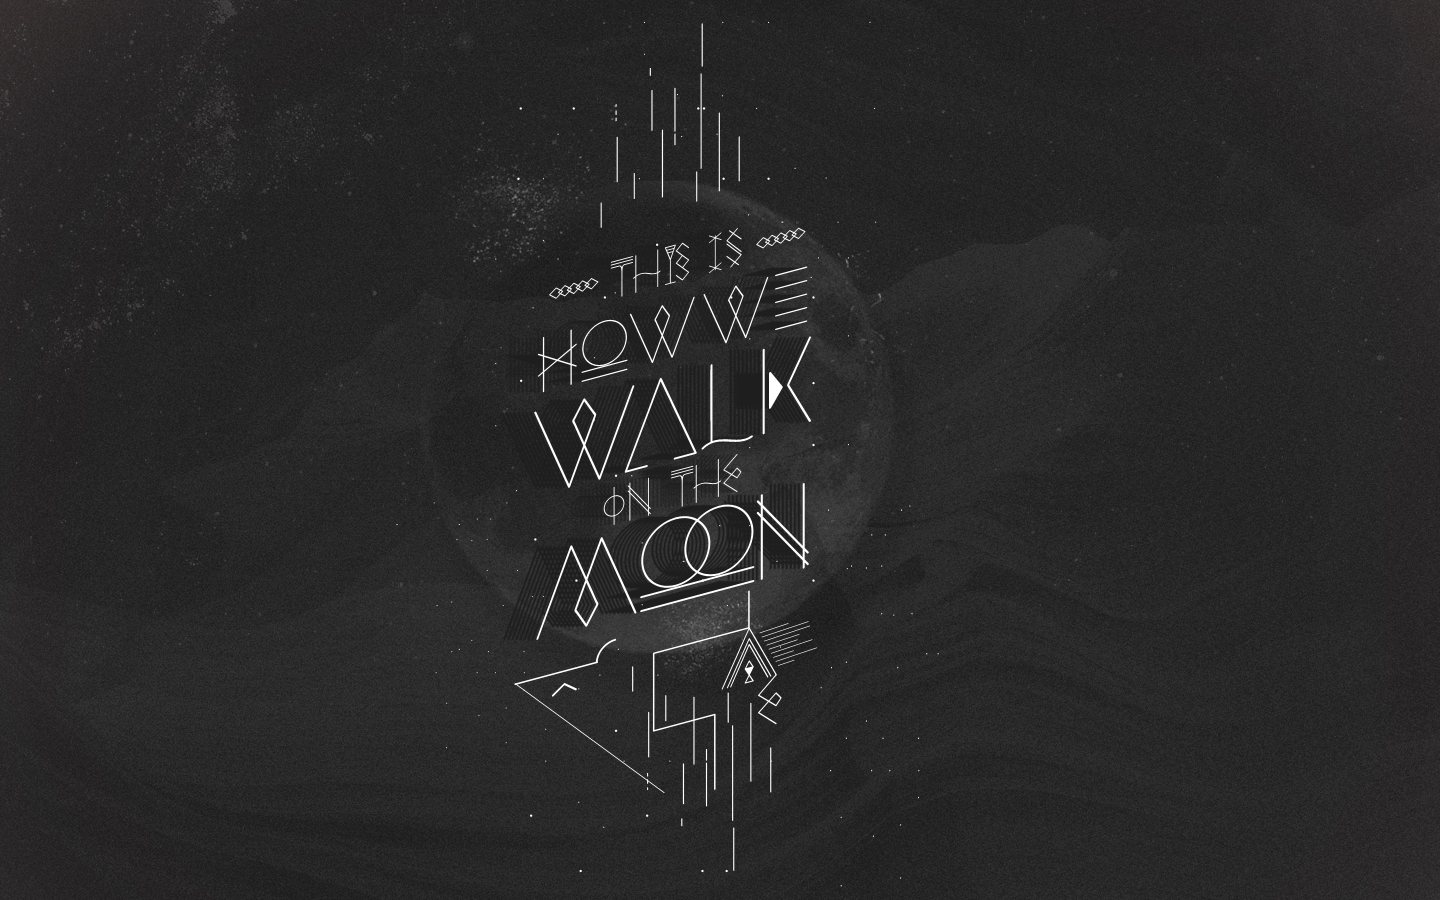 This Is How We Walk On The Moon